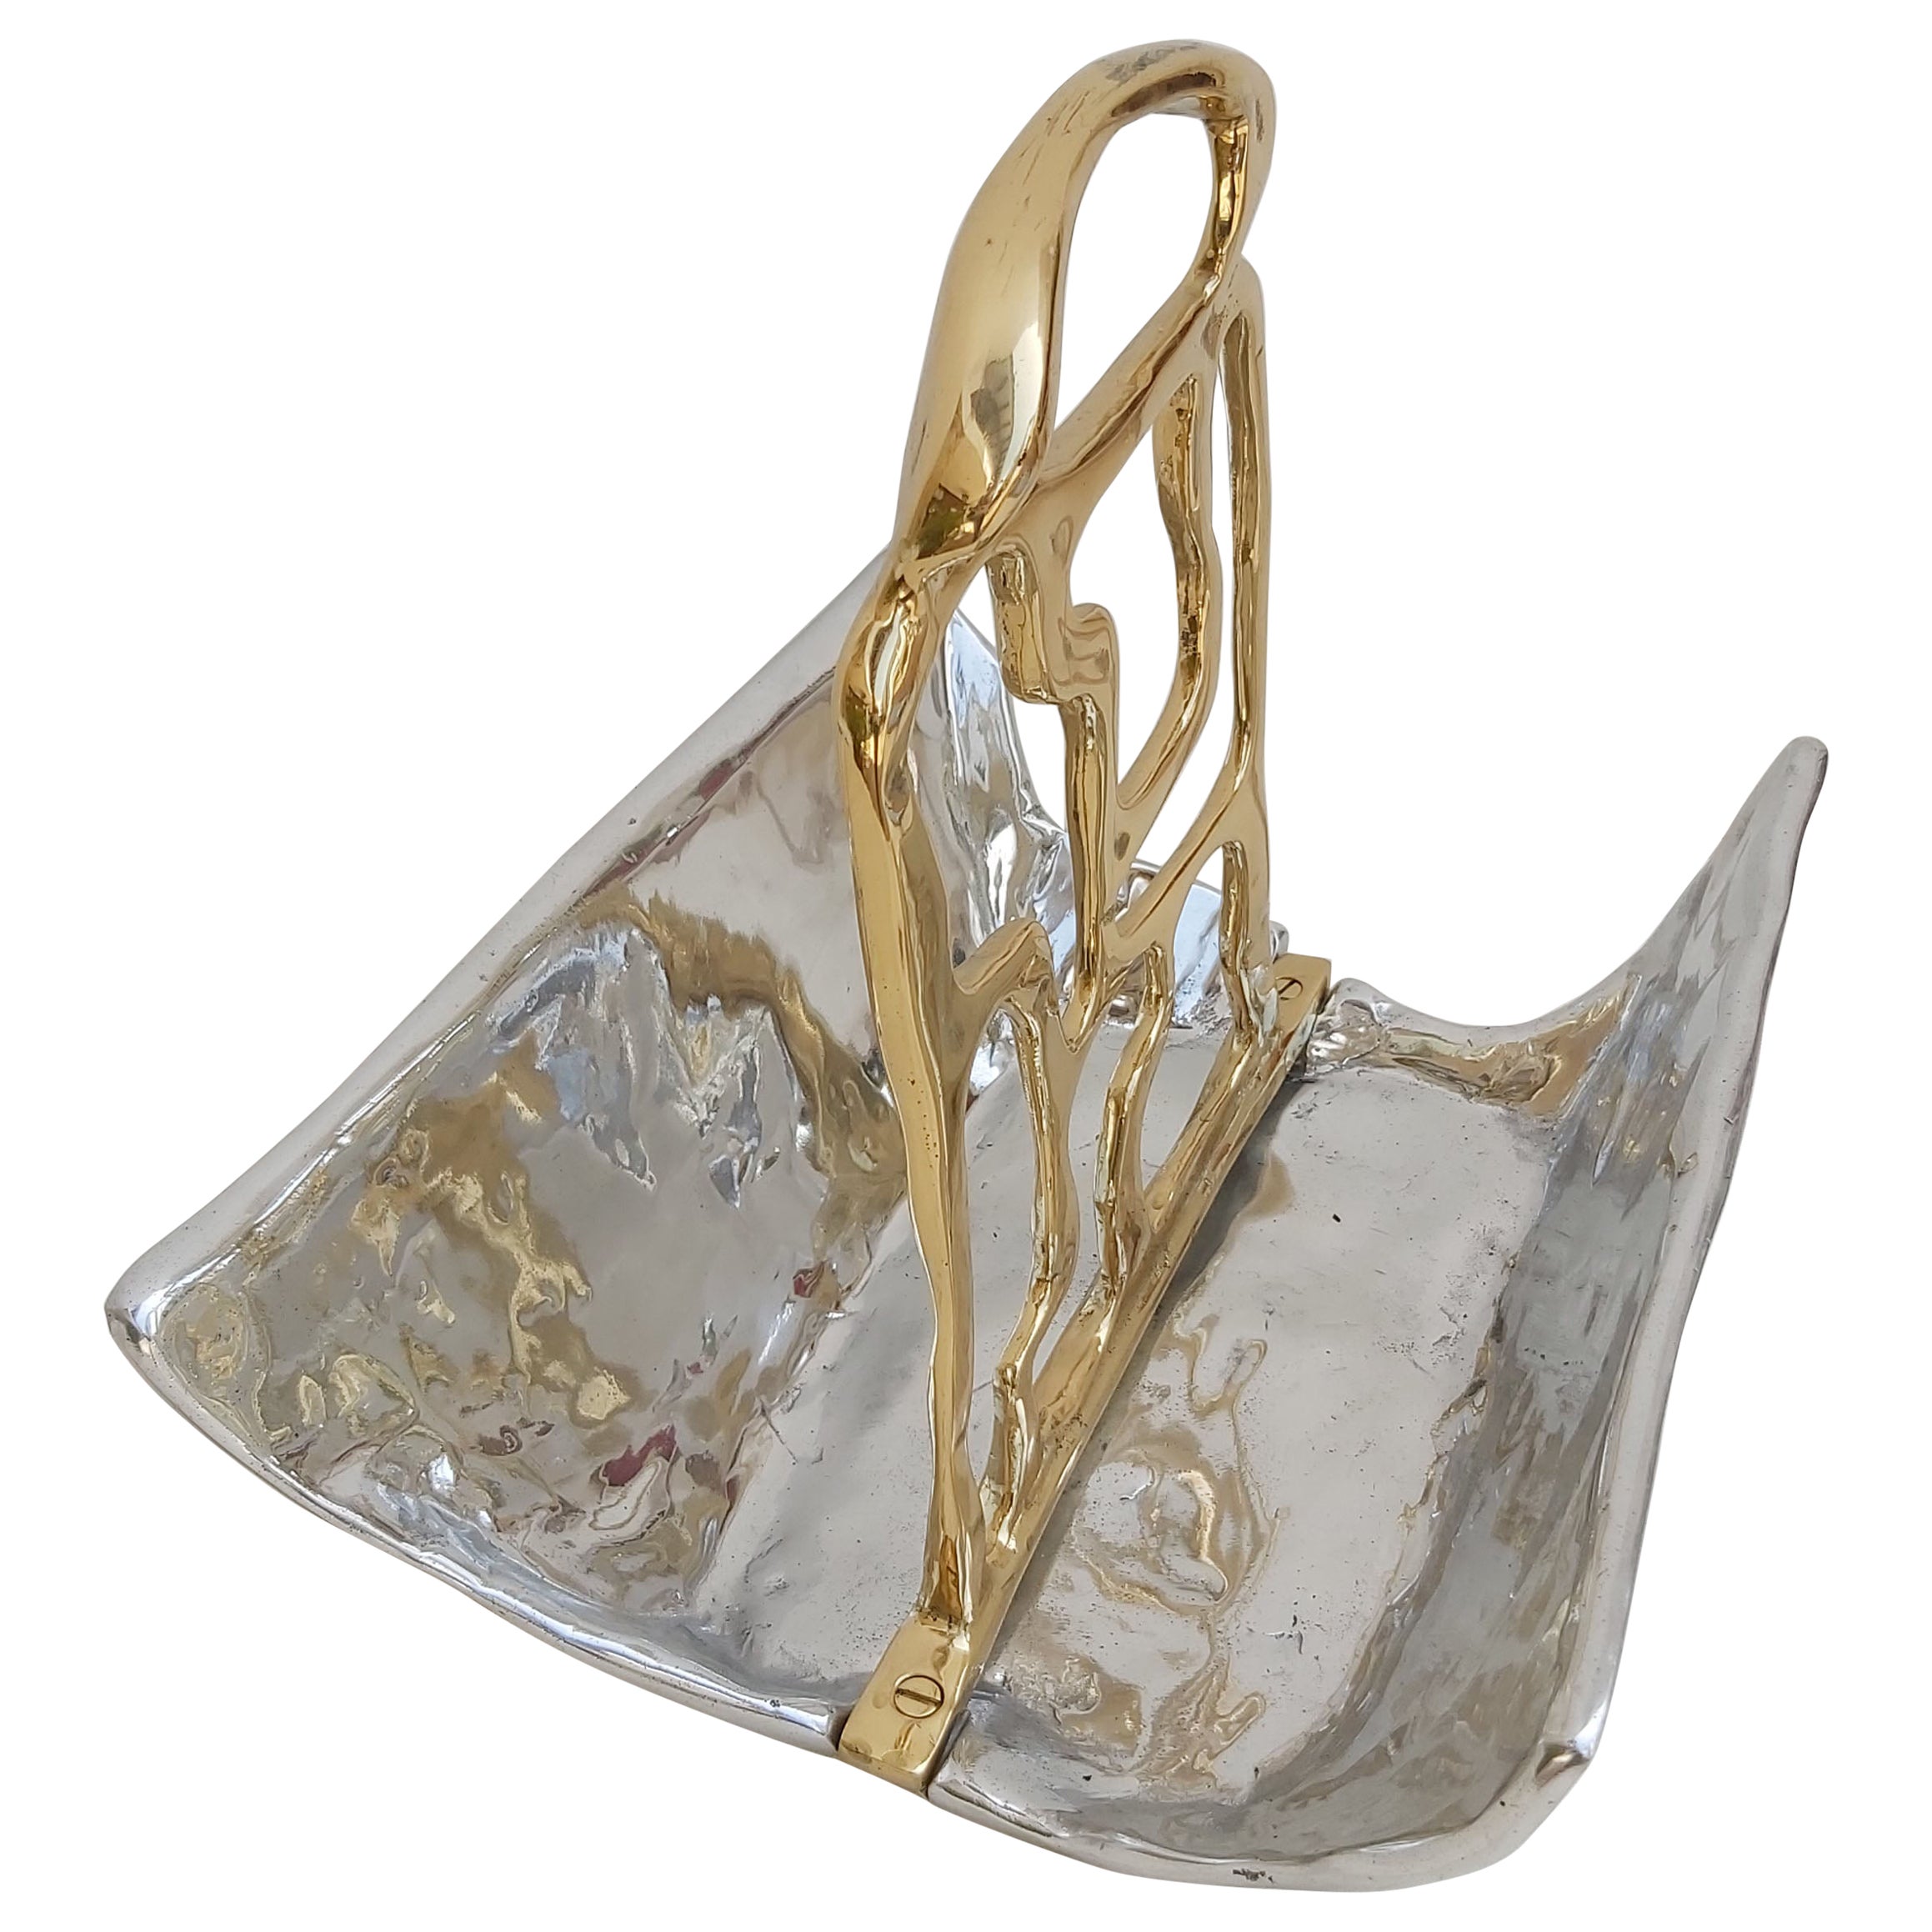 Metal Brutalist Magazine Rack Solid Cast Brass and Aluminium Handmade in Spain For Sale